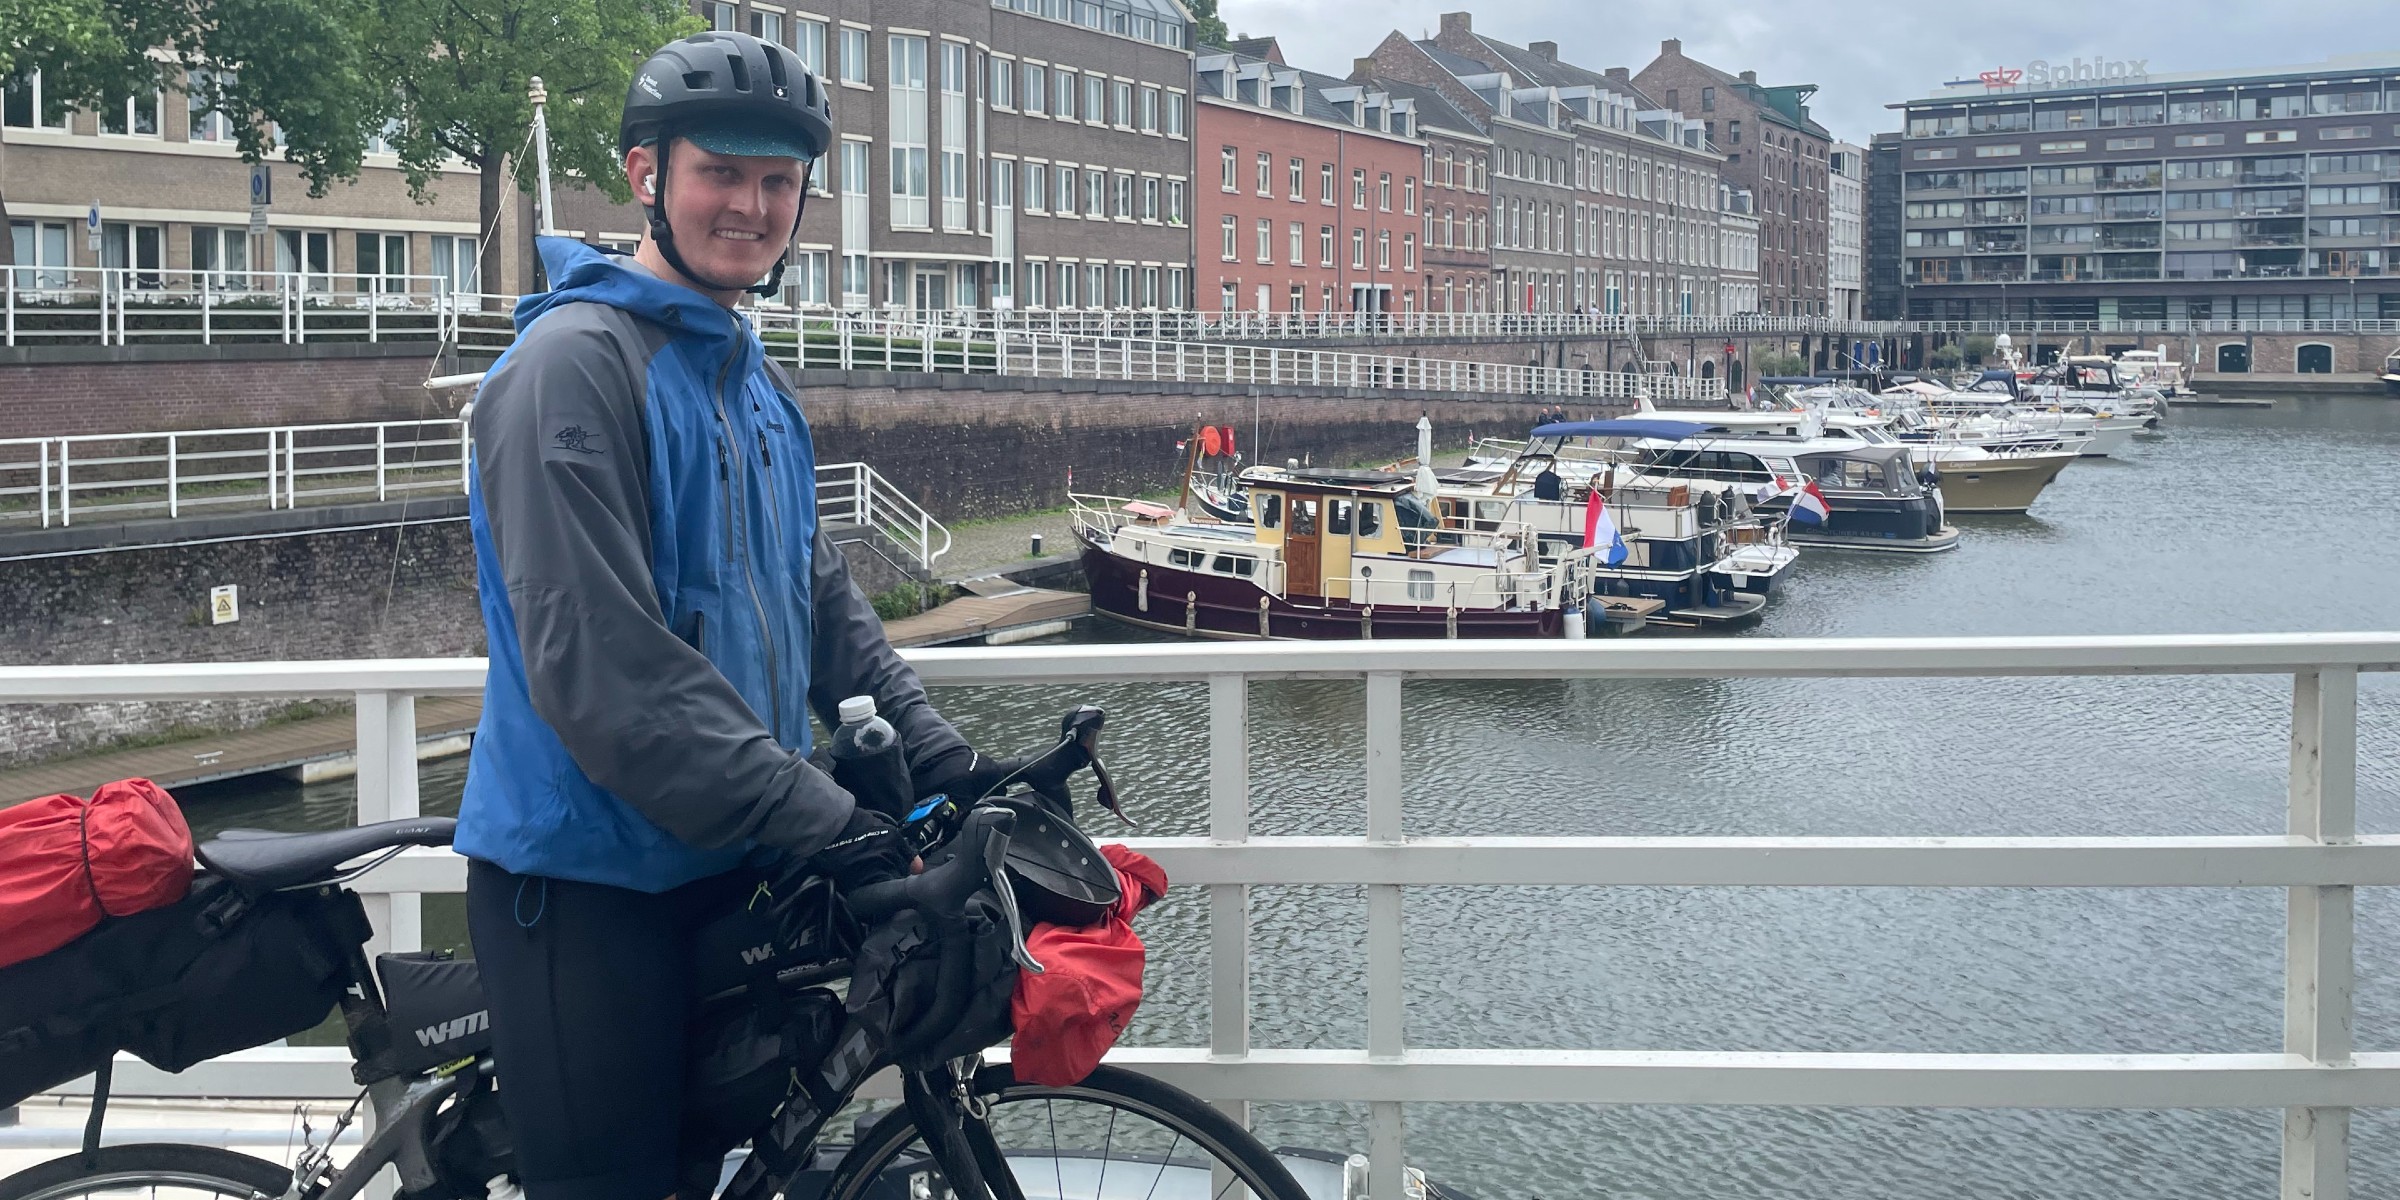 OsloMet-student Åsmund is standing with his bike on a bridge over a river in Maastricht in the Netherlands. He is smiling at the camera.